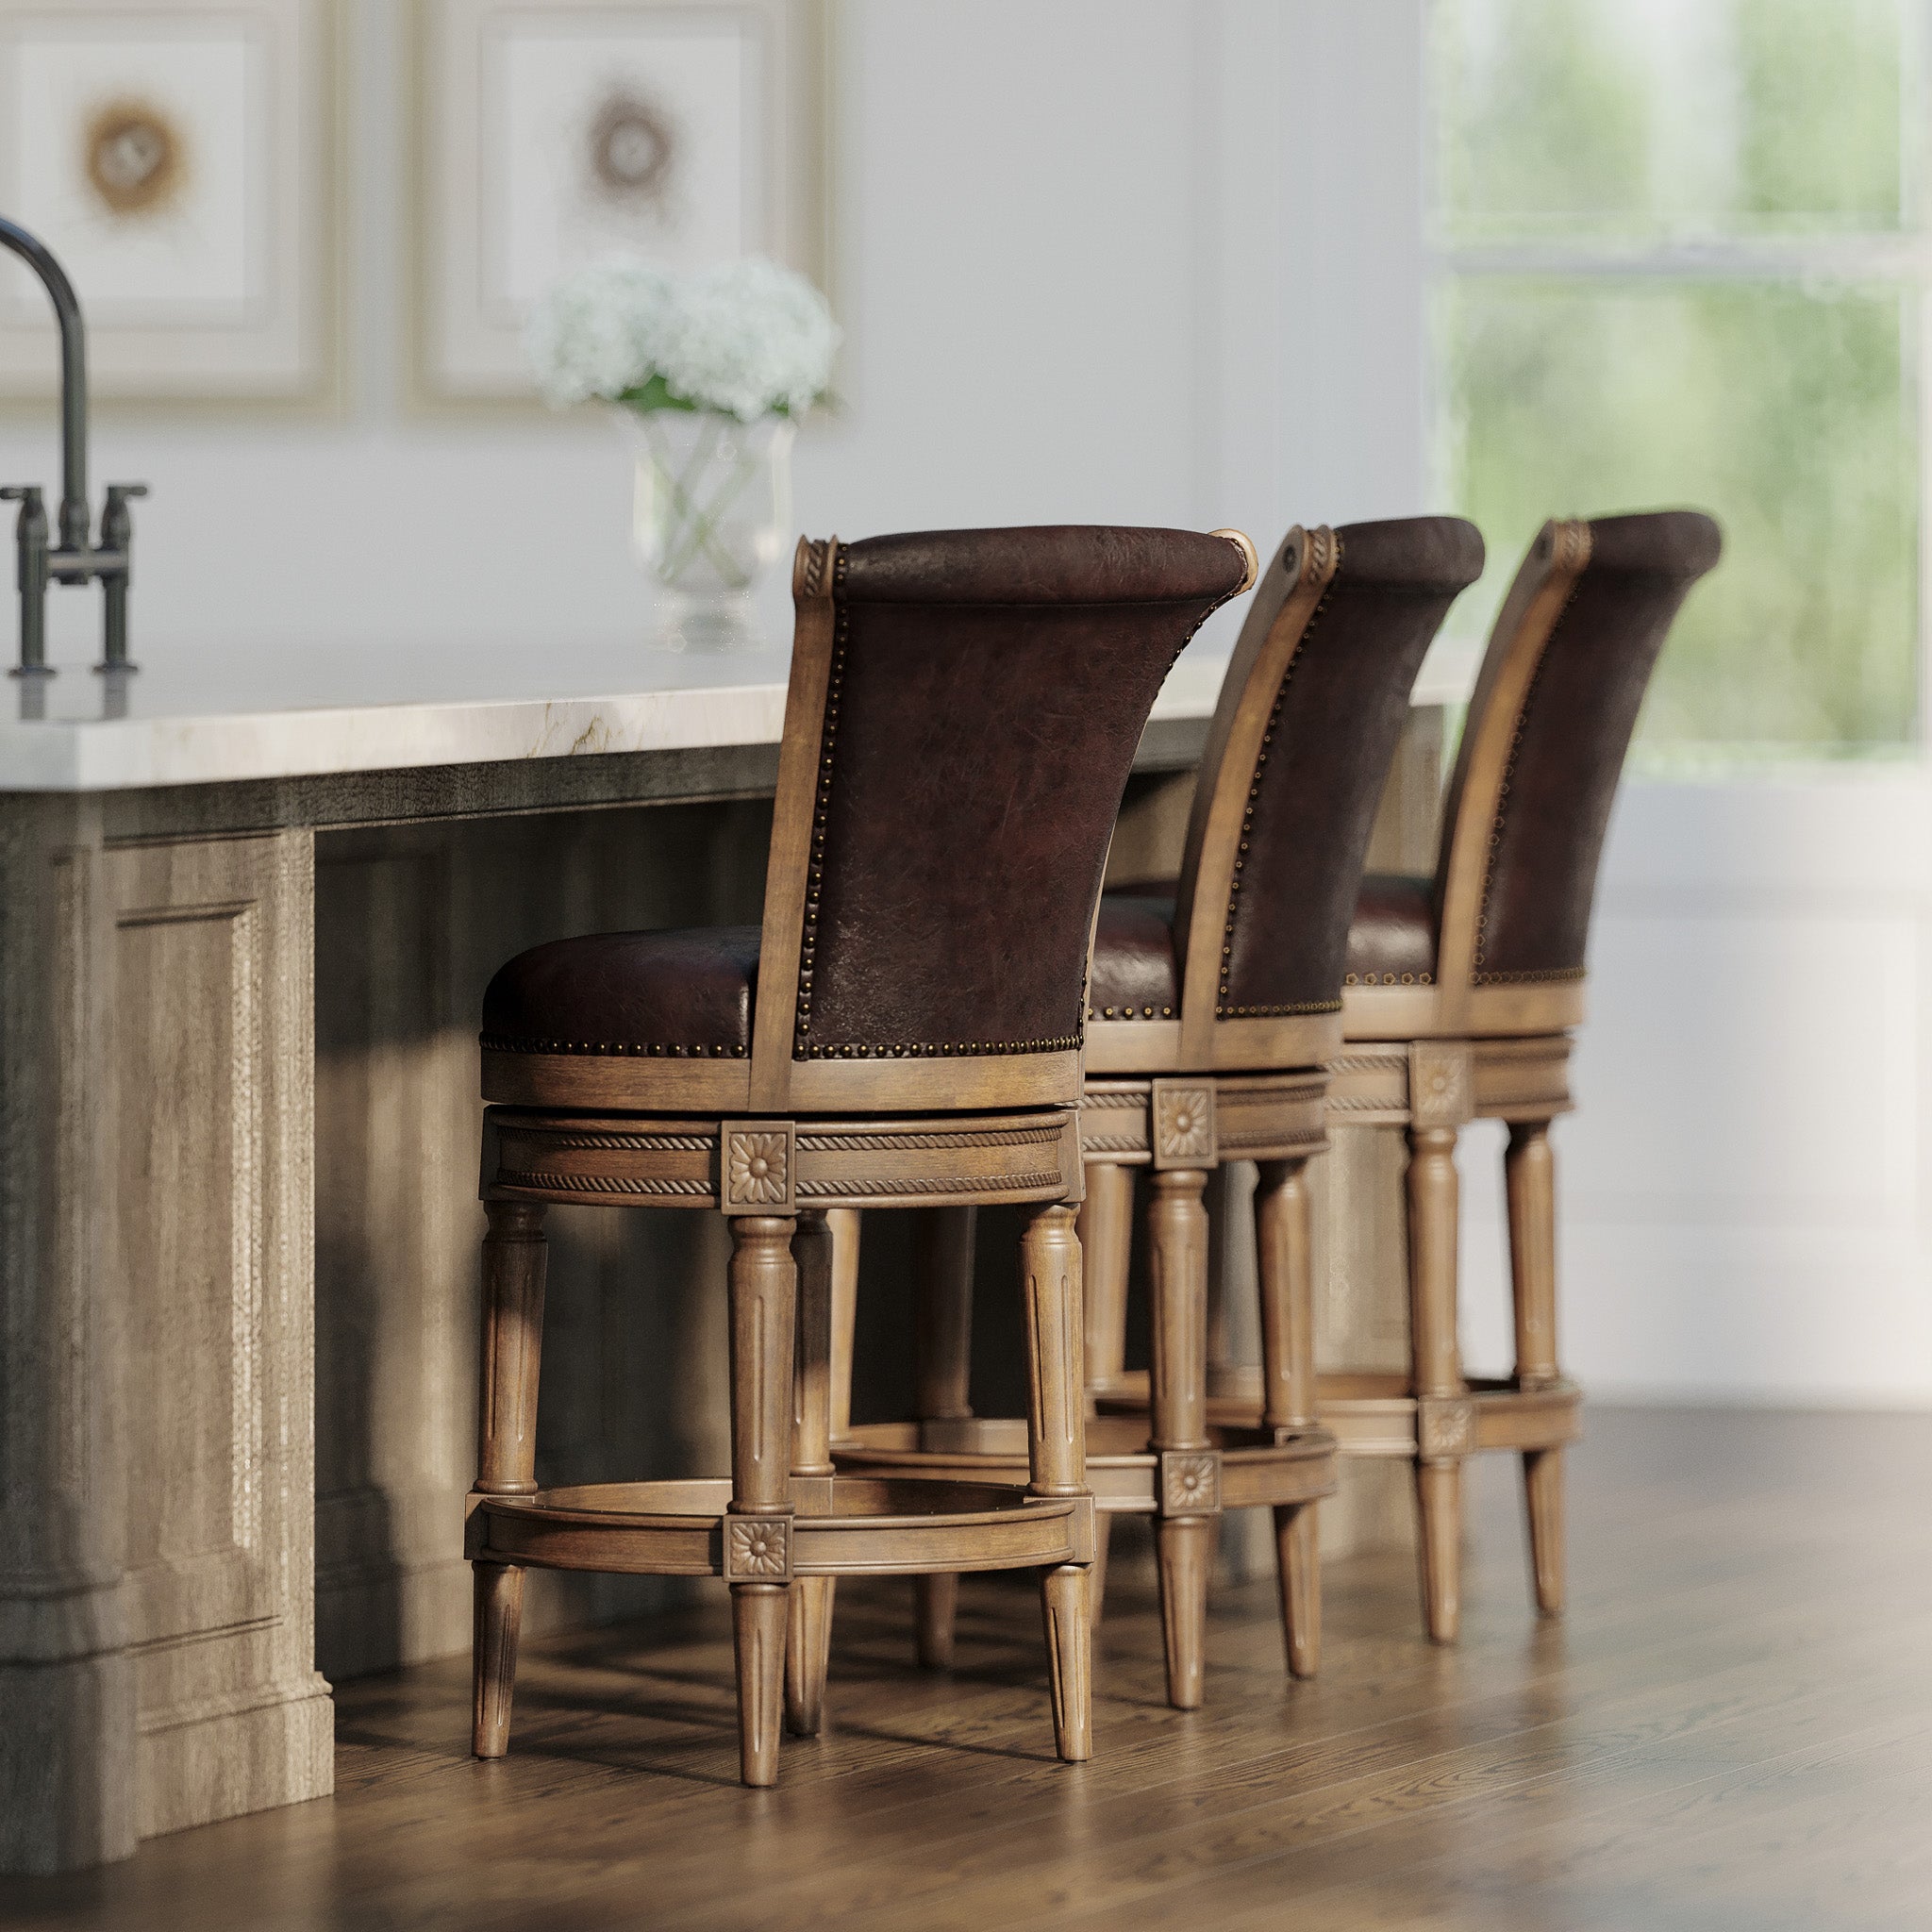 Pullman Counter Stool in Walnut Finish with Marksman Saddle Vegan Leather in Stools by Maven Lane